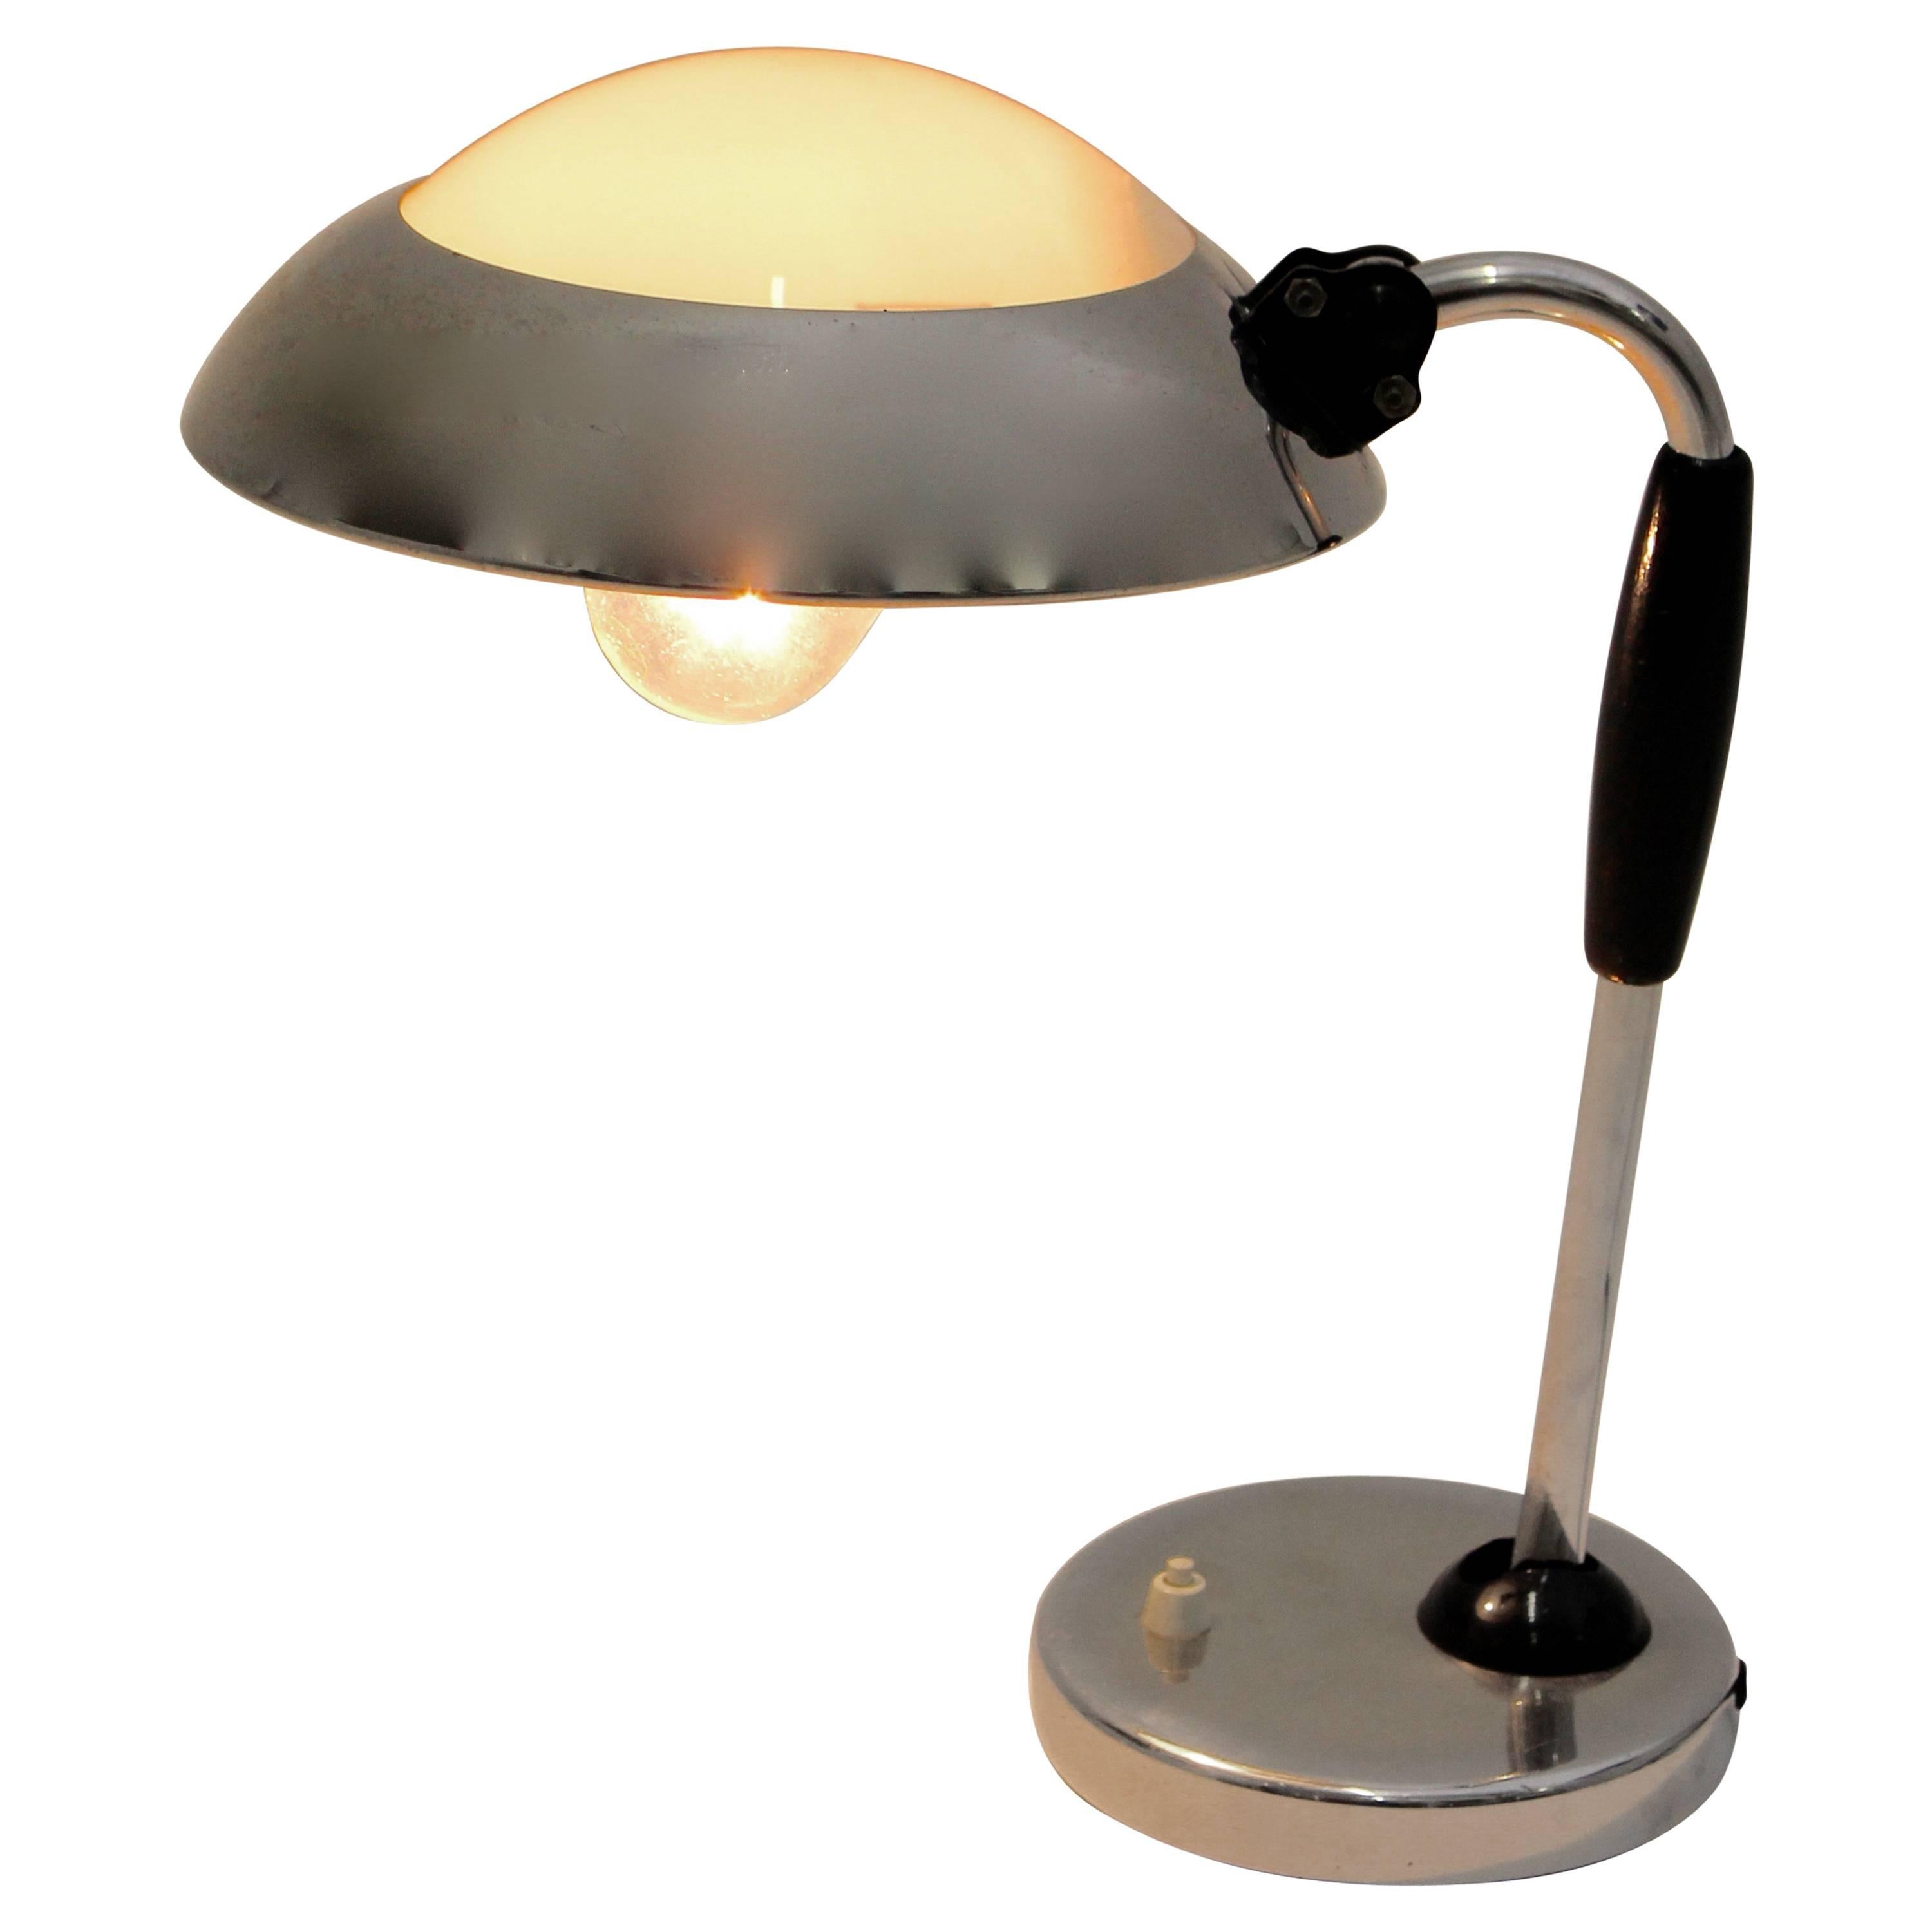 Bauhaus Vintage Metal Desk Lamp Attributed to Christian Dell 1930s Germany For Sale